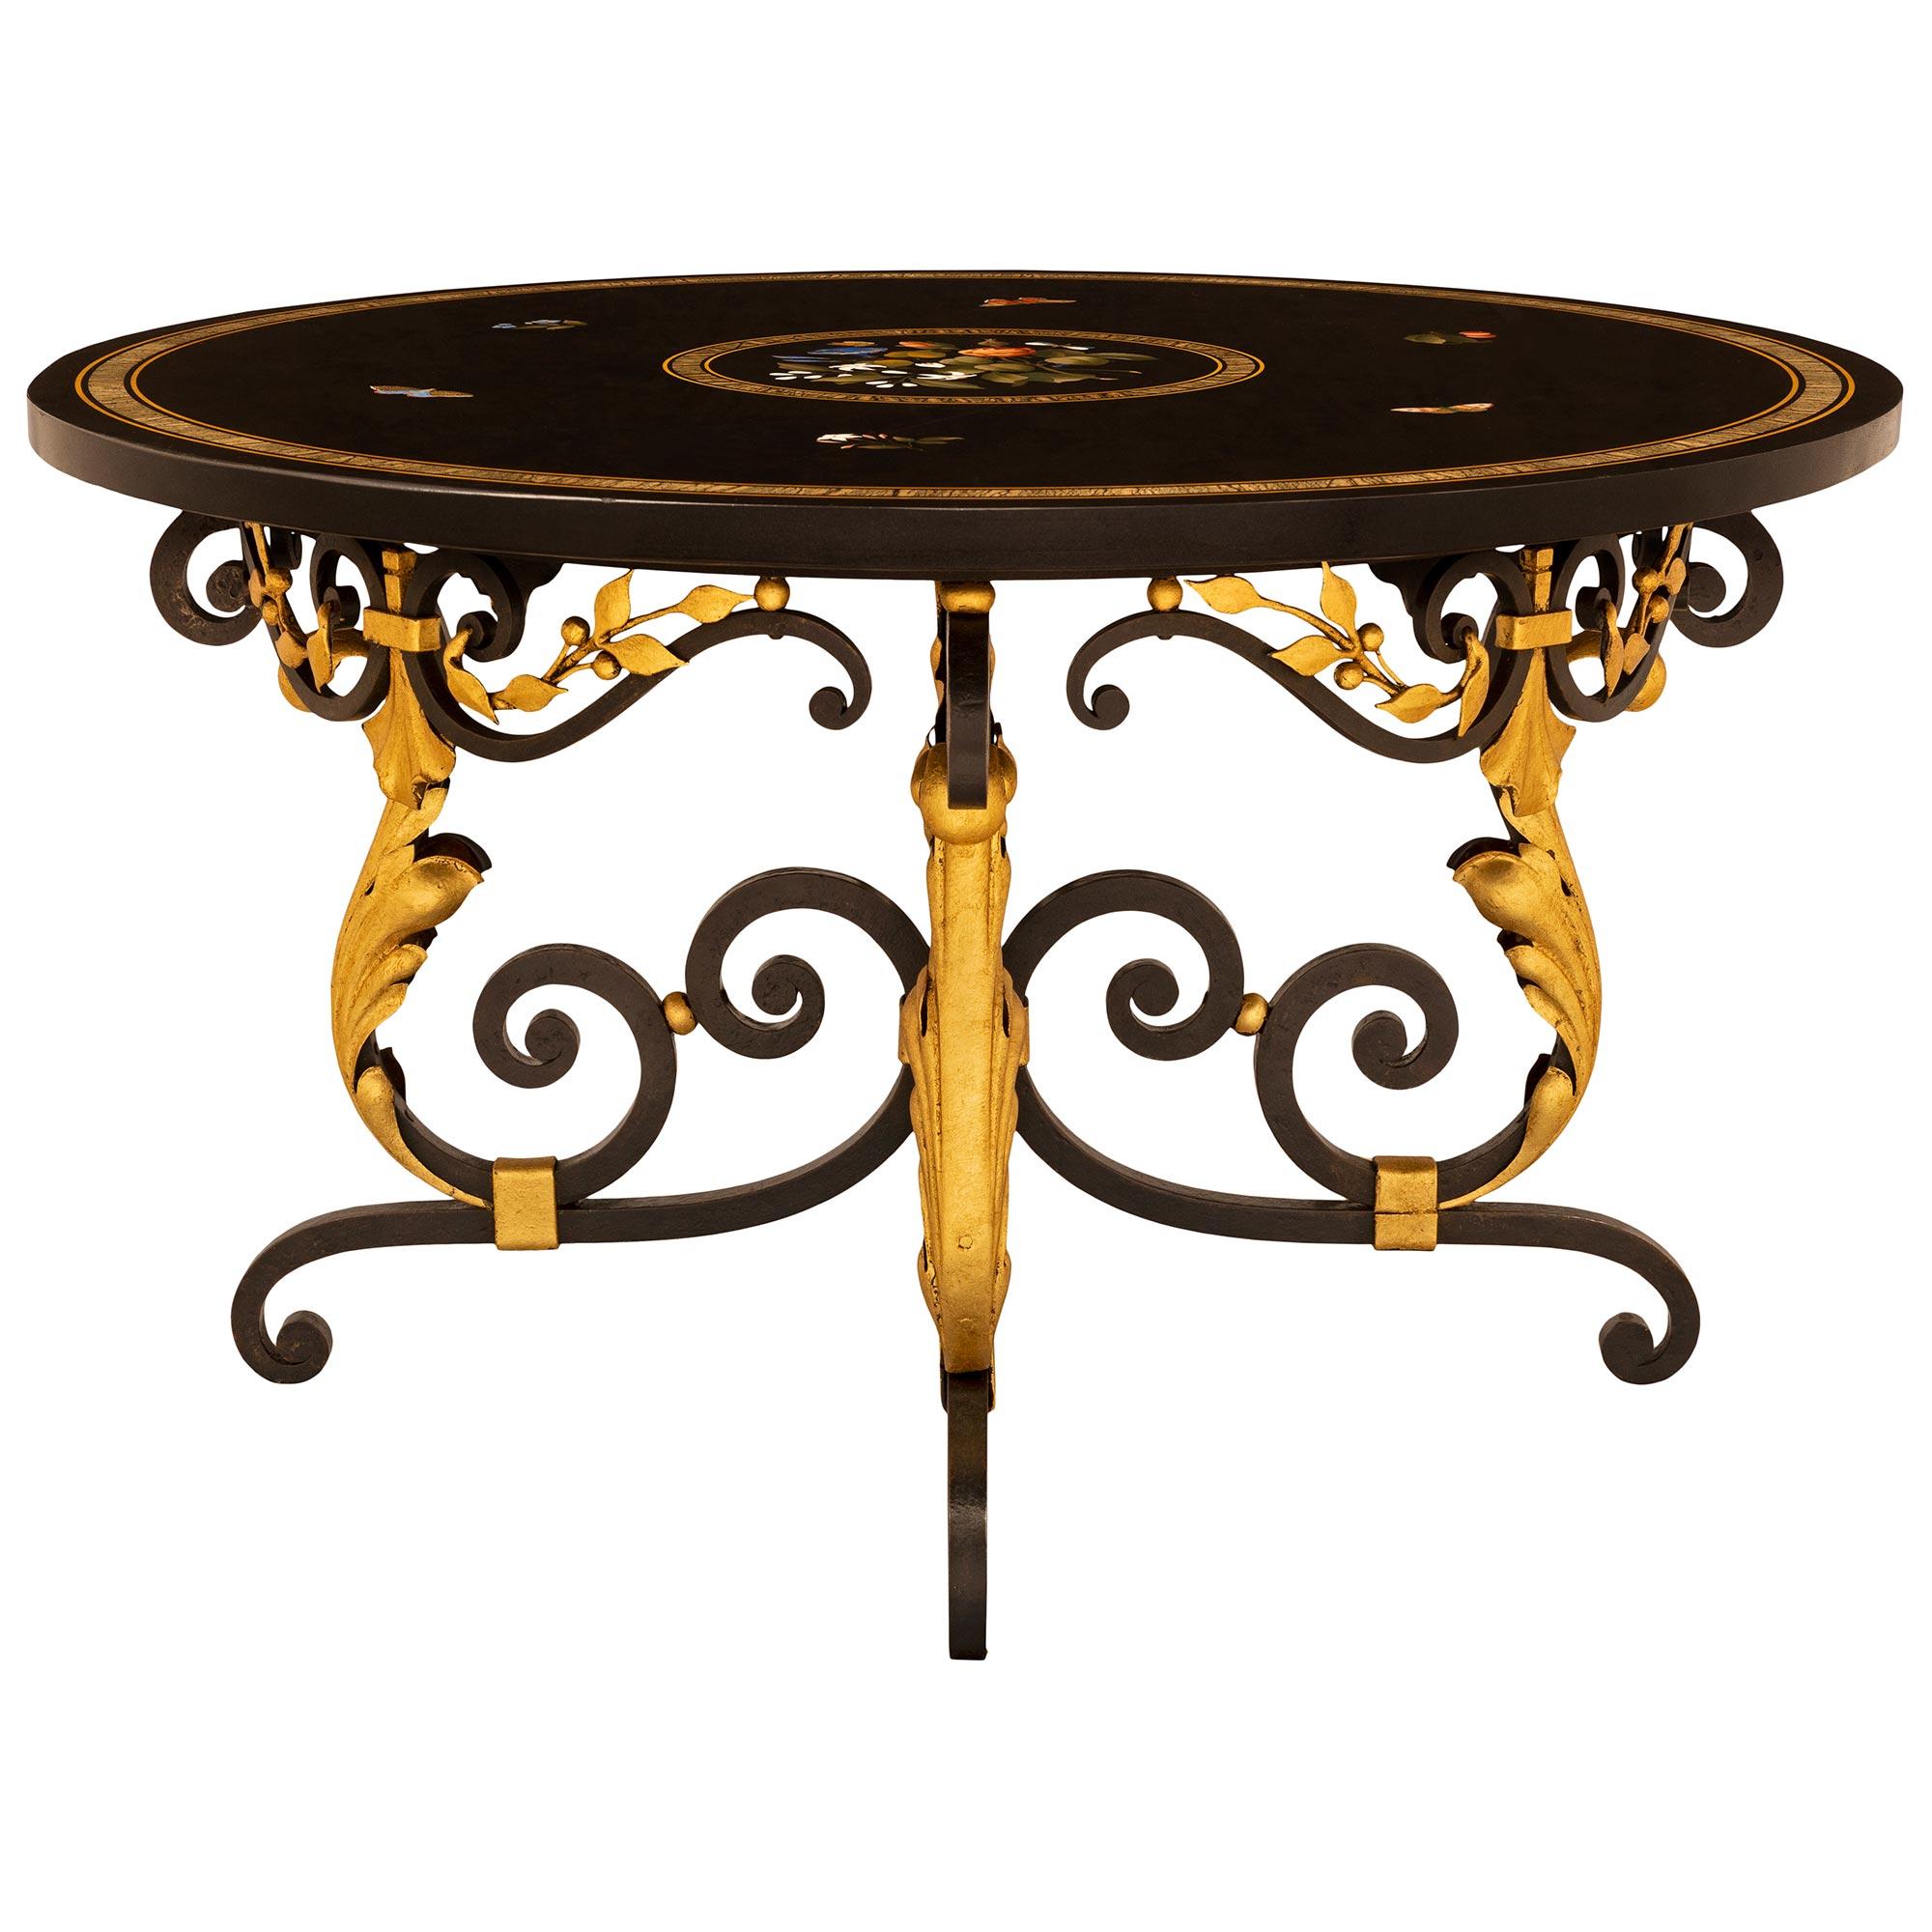 Italian 19th Century Florentine St. Wrought Iron, Gilt Metal And Marble Table For Sale 1